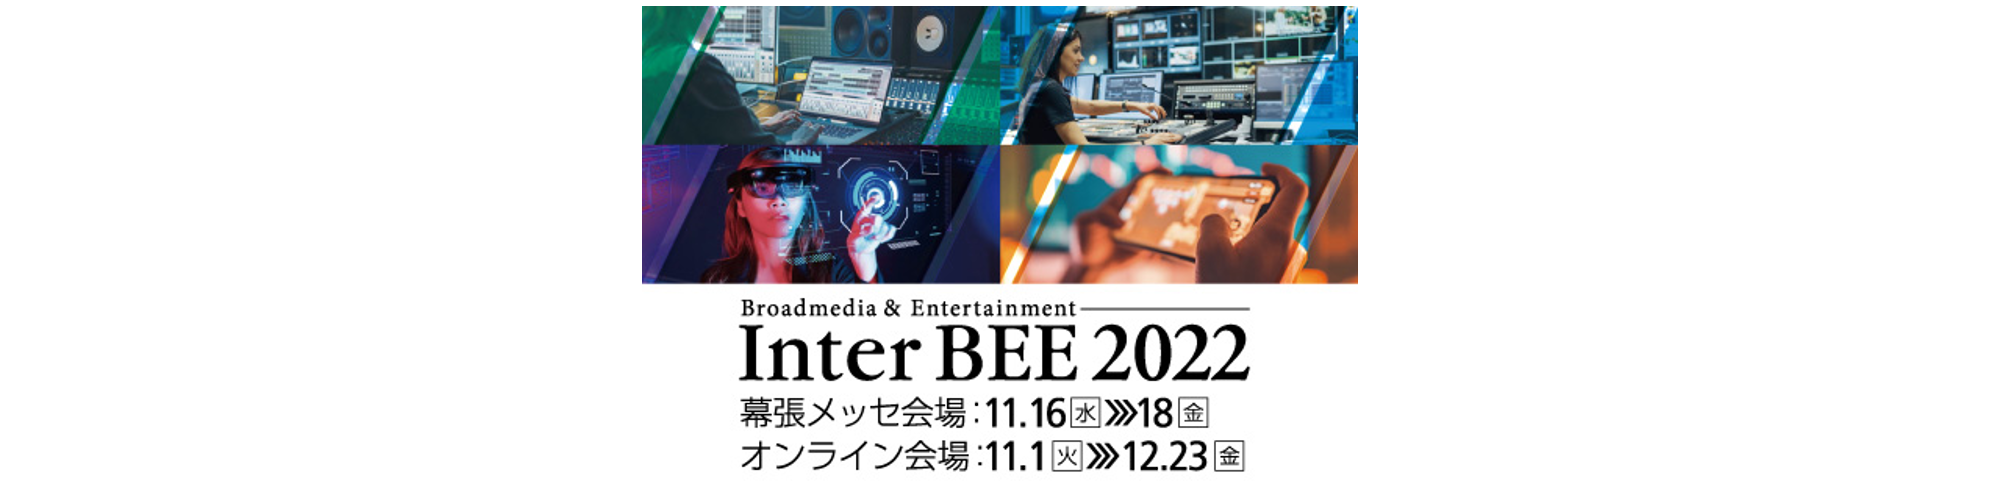 bee2022_w458h313_j.png